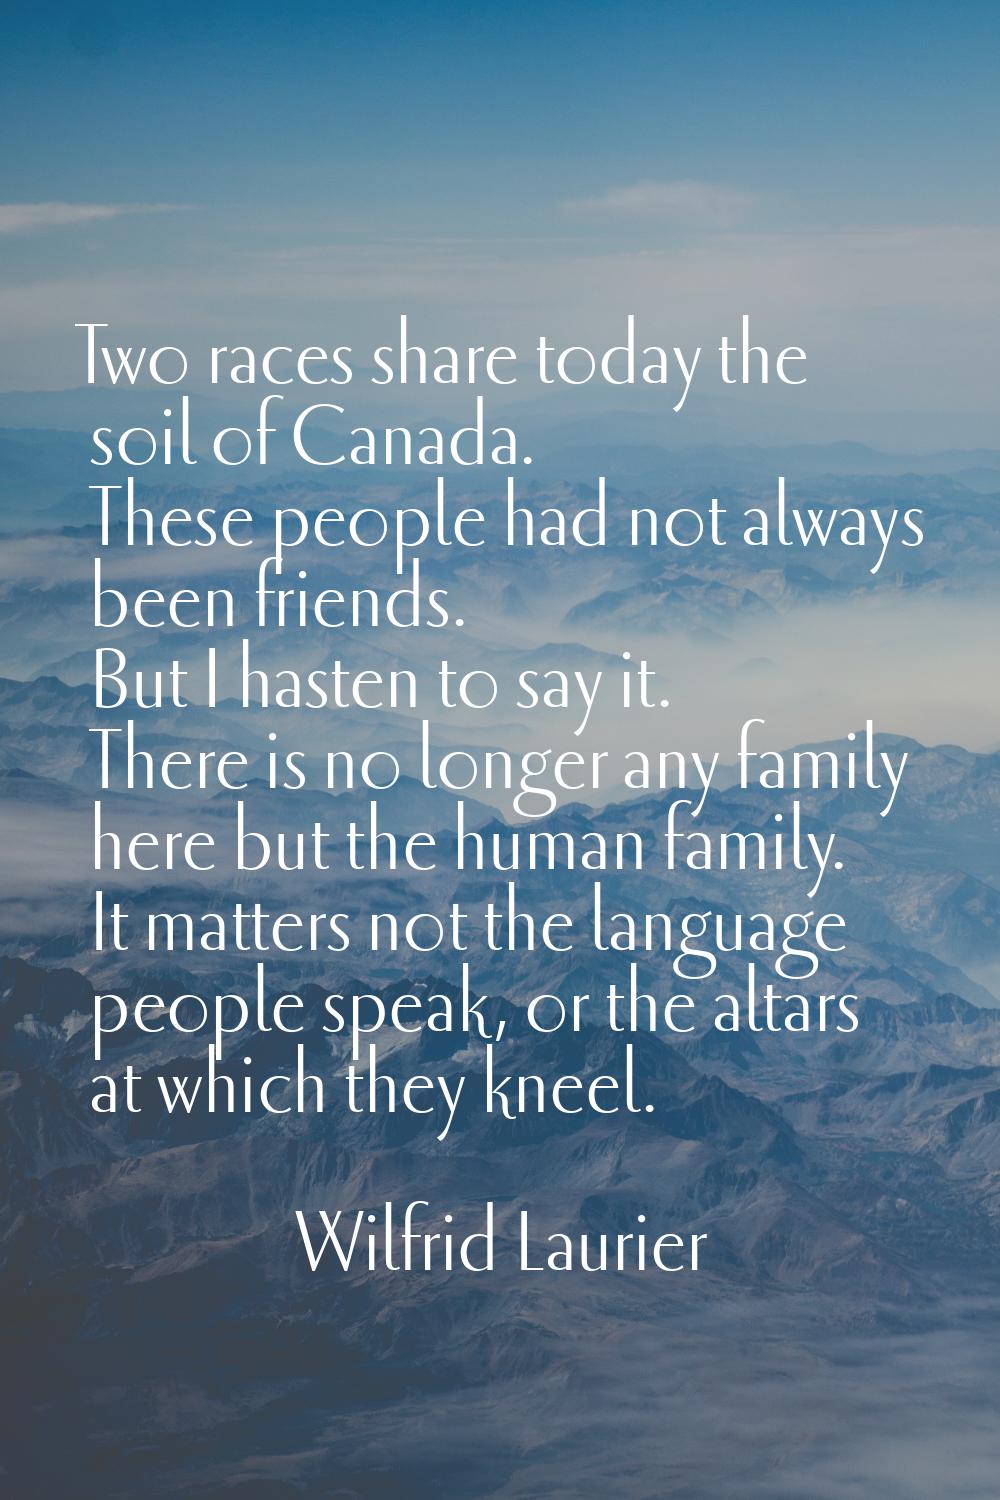 Two races share today the soil of Canada. These people had not always been friends. But I hasten to